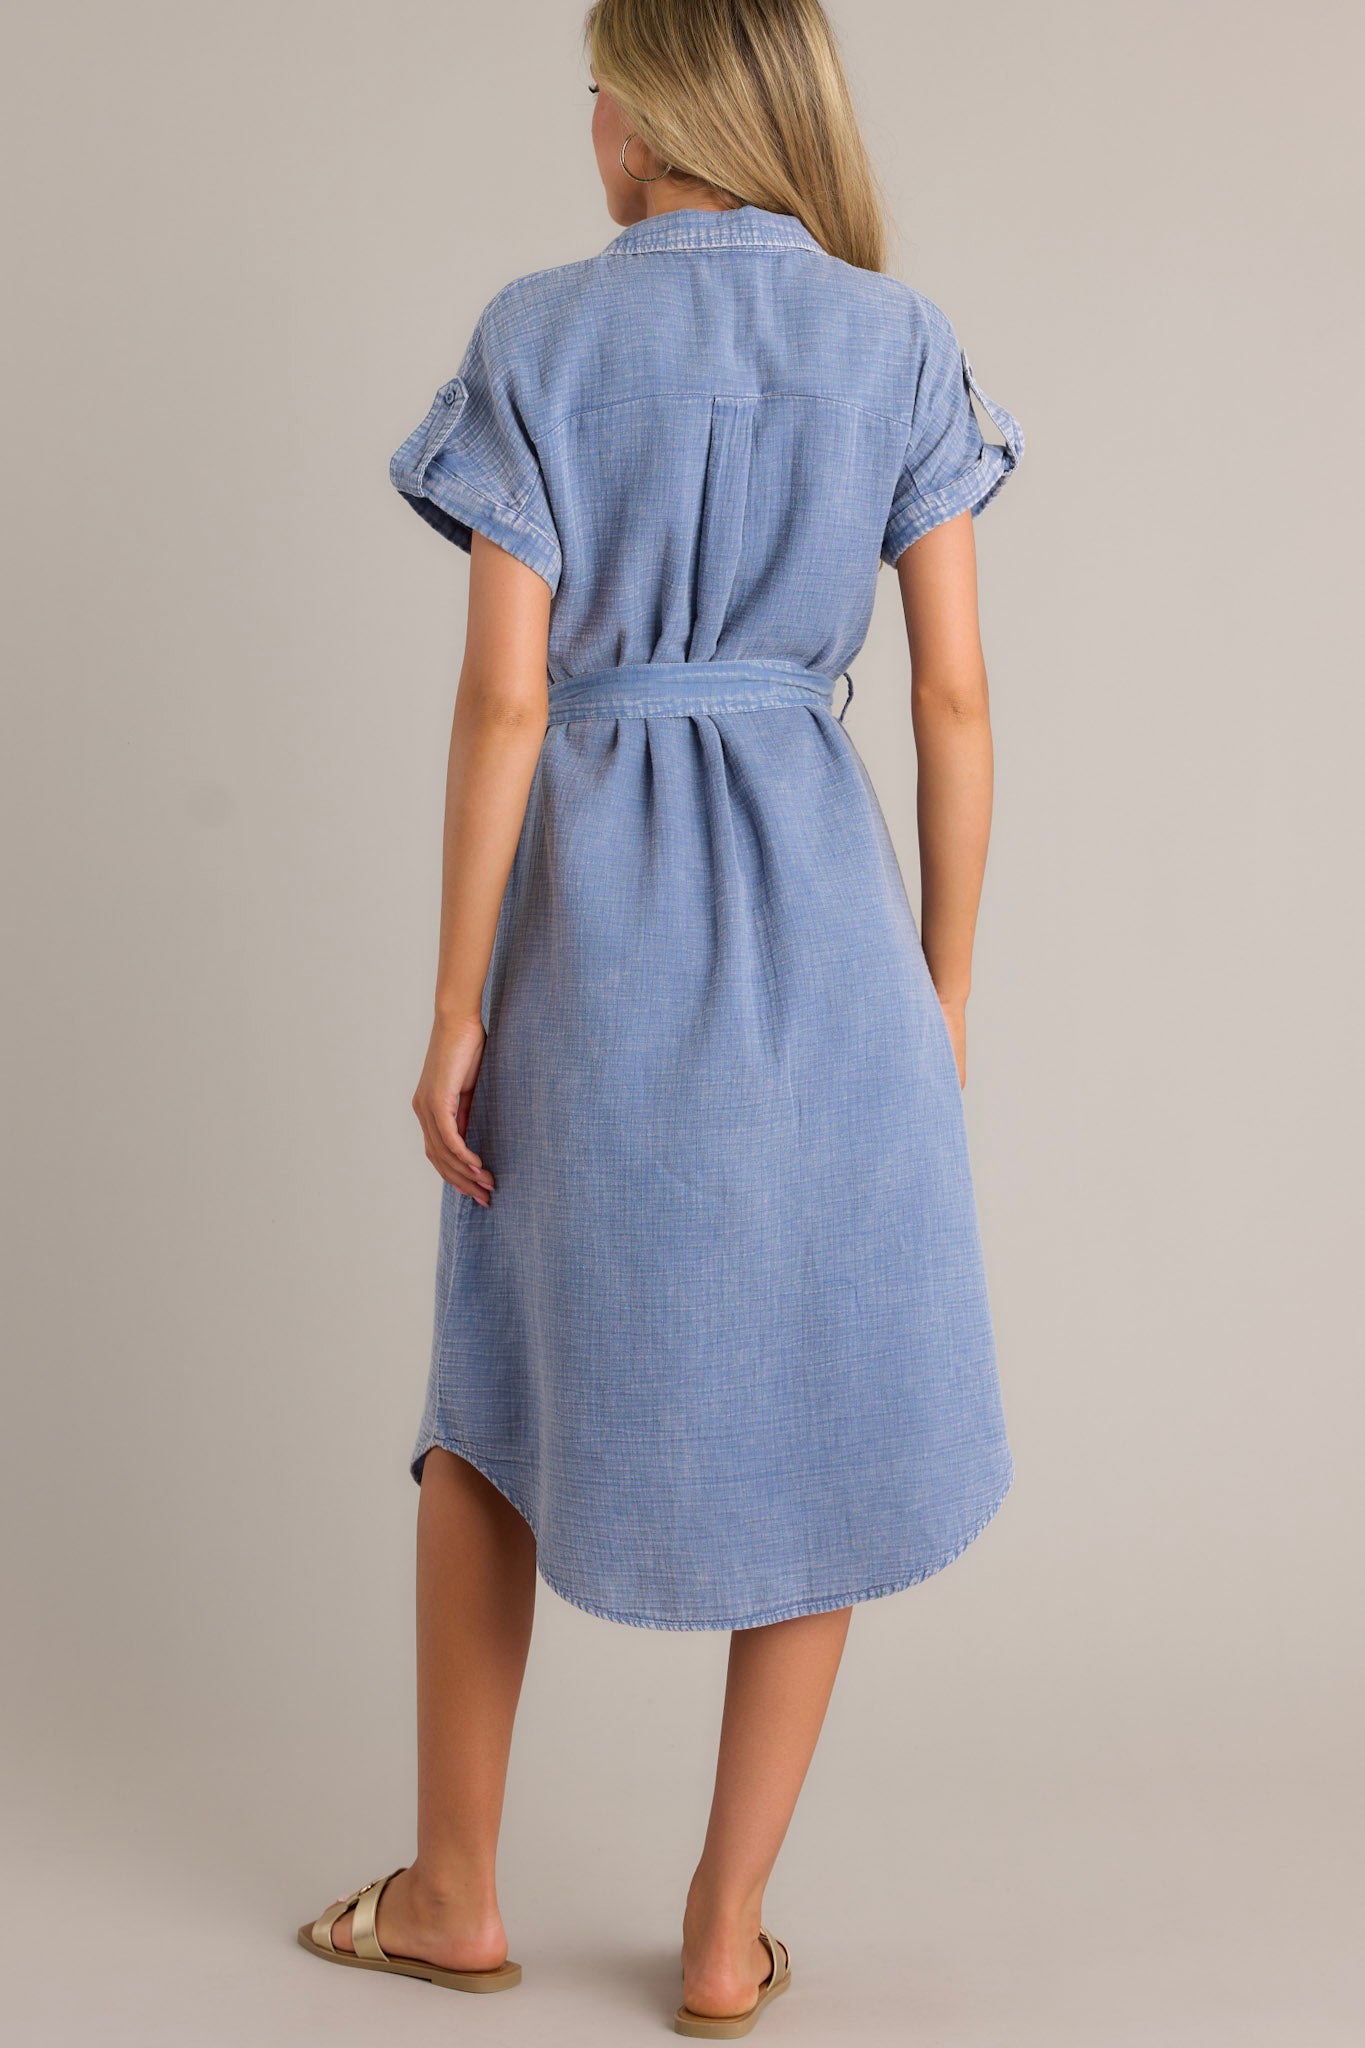 Back view of a blue maxi dress highlighting the self-tie waist belt, belt loops, and overall fit.